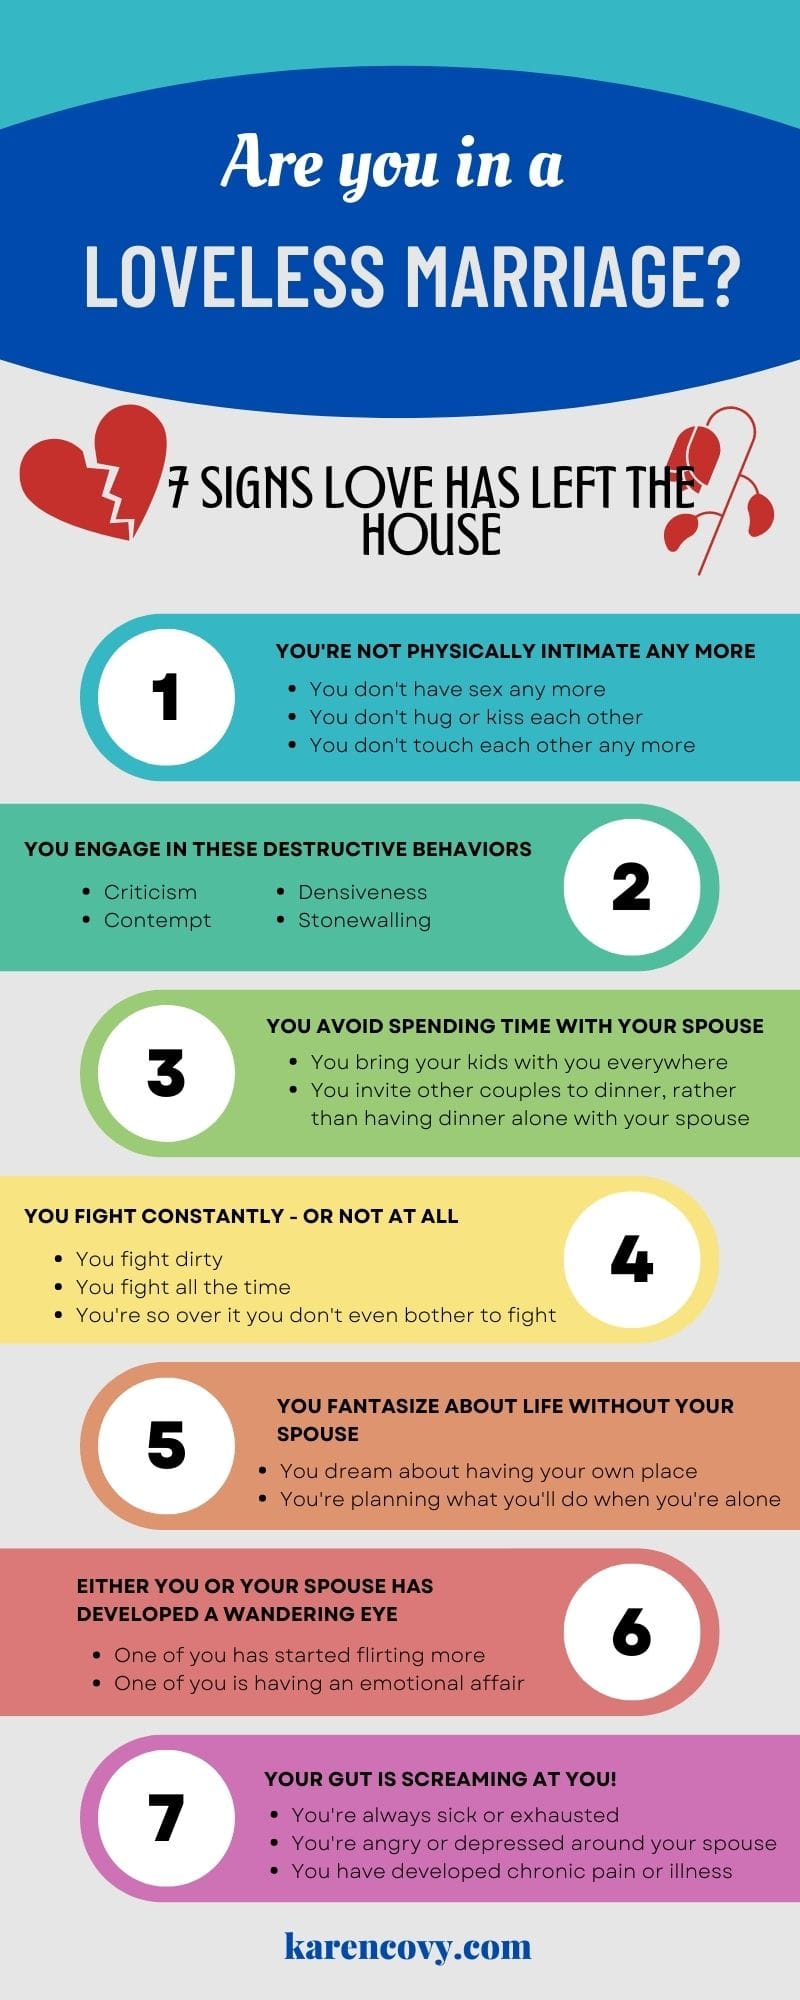 Infographic showing 7 signs of a loveless marriage